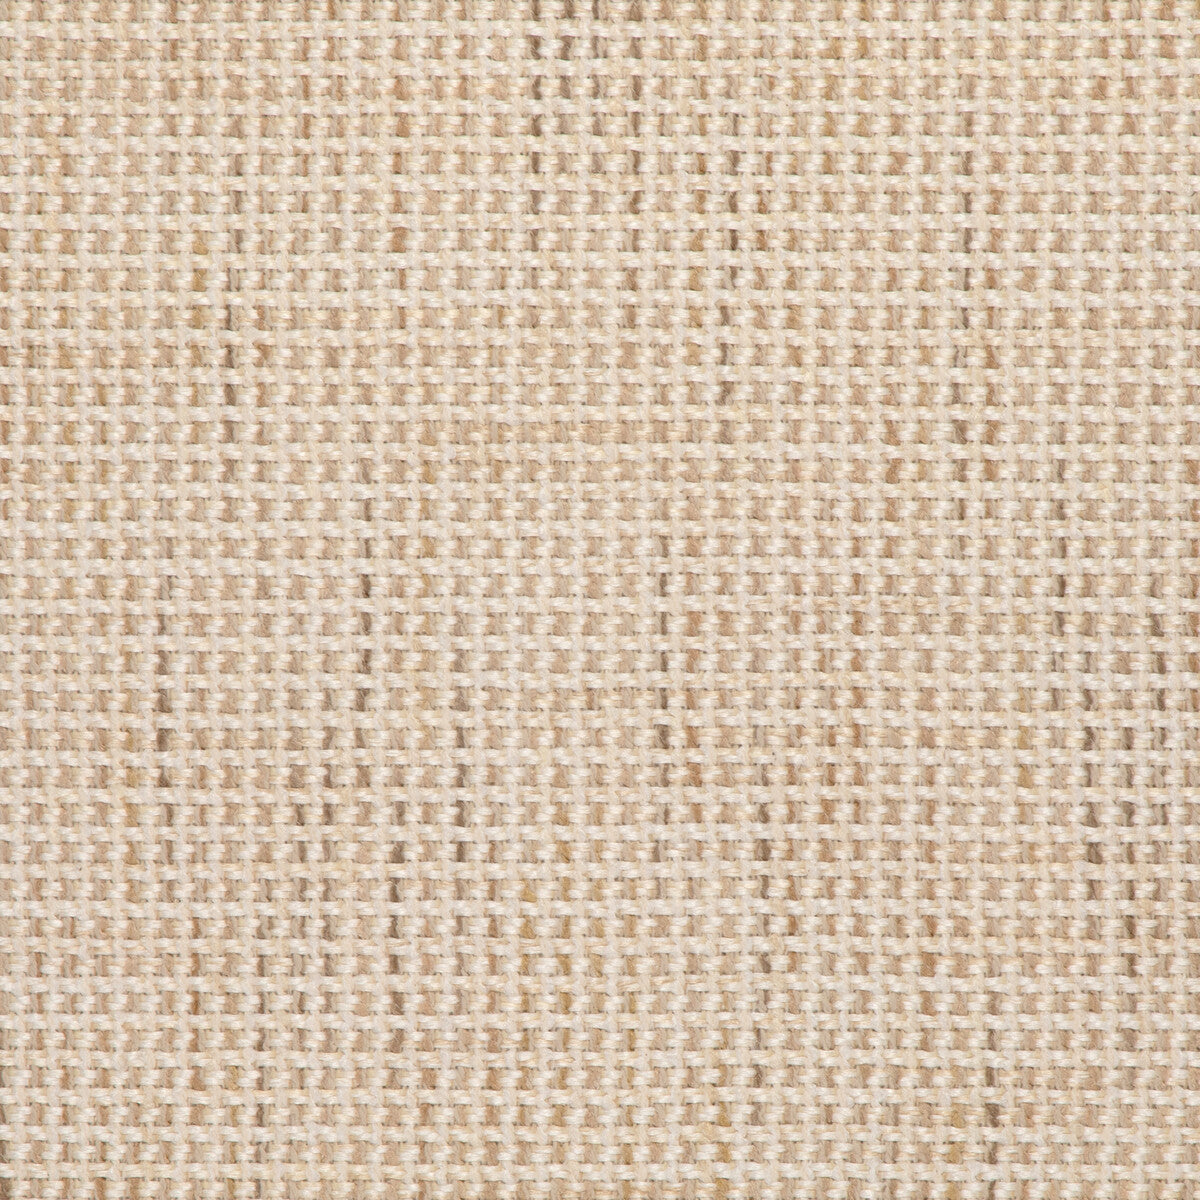 Kravet Design fabric in 37234-16 color - pattern 37234.16.0 - by Kravet Design in the Woven Colors collection